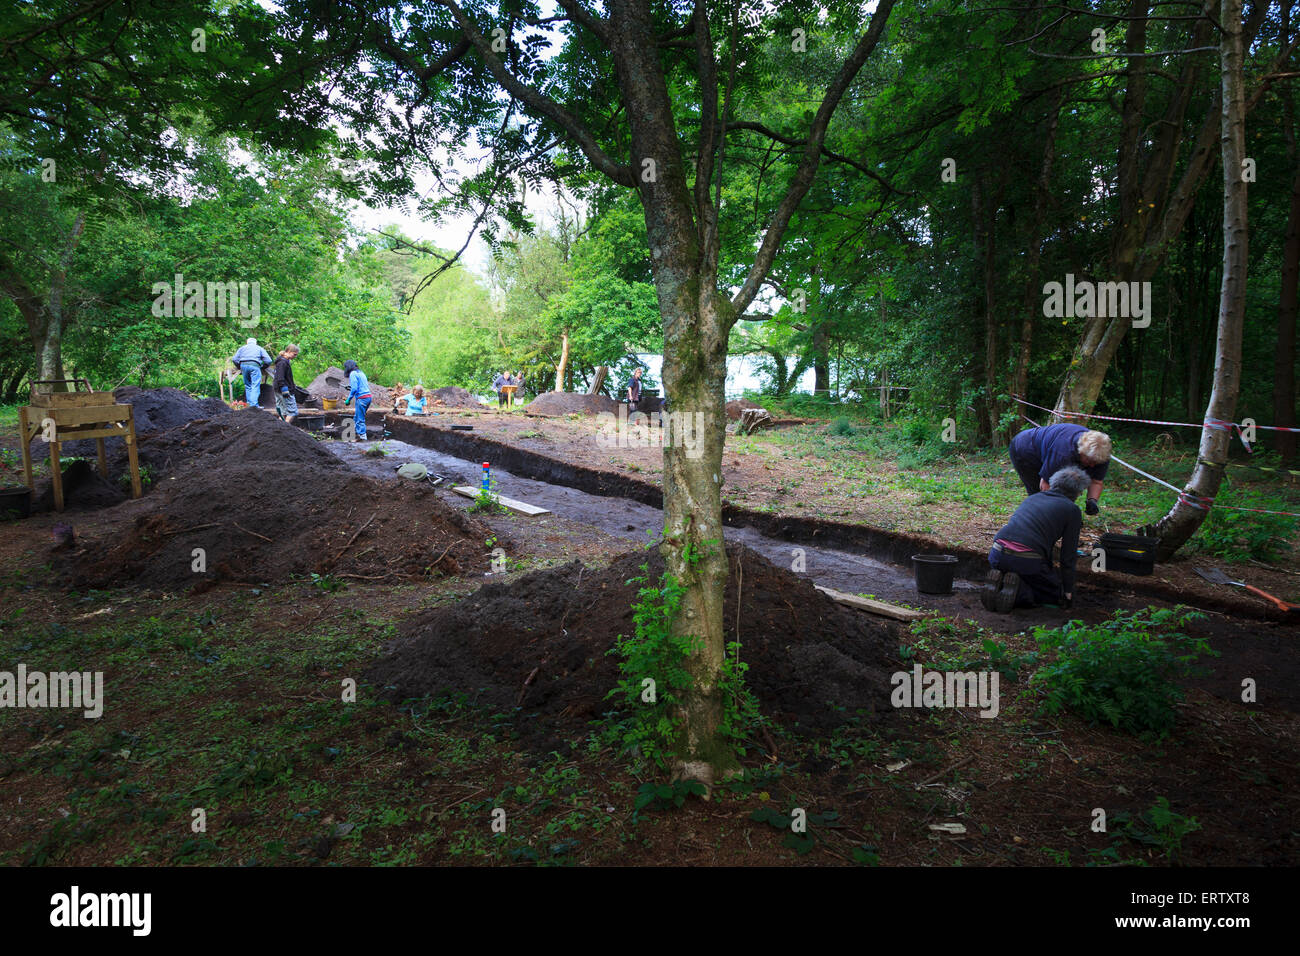 Archaeologists working on a Bronze Age excavation trench in a forest Stock Photo